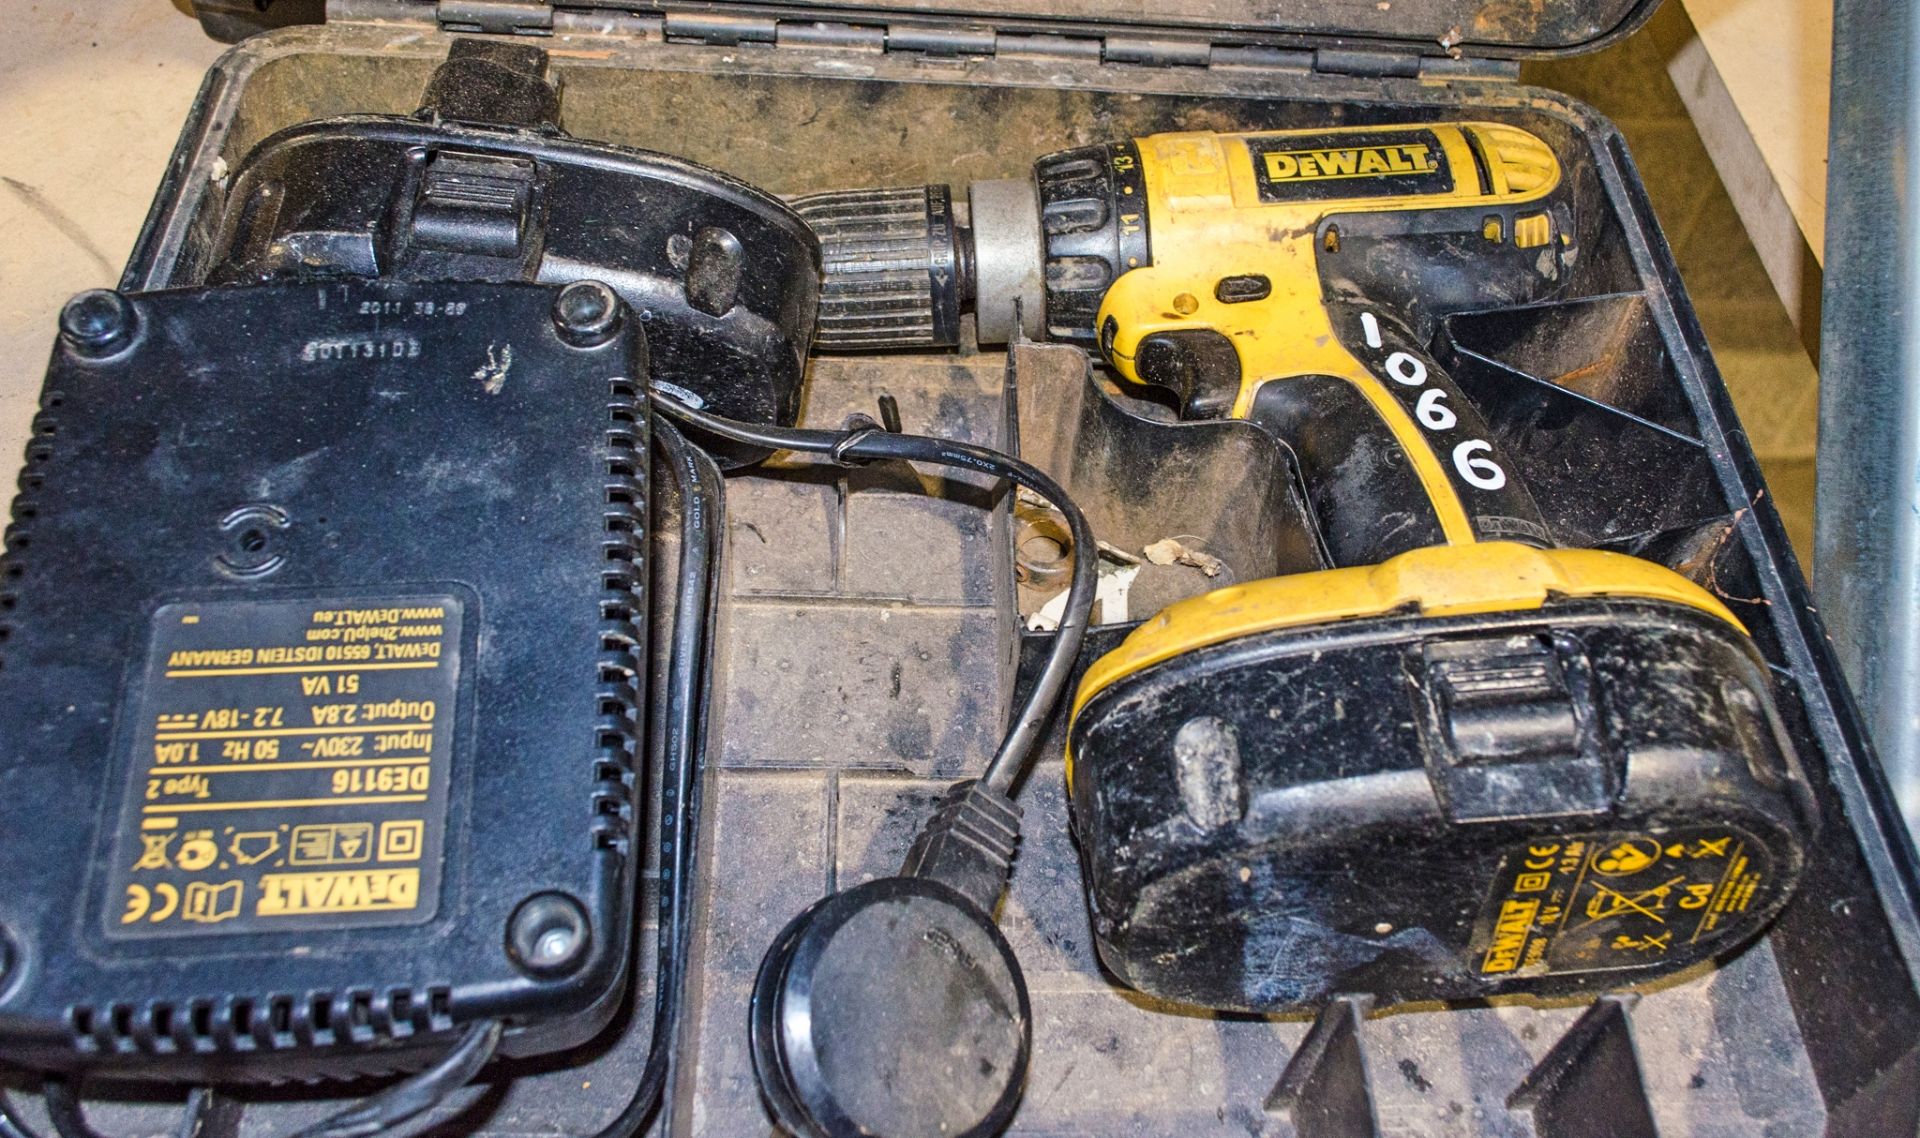 Dewalt DC100KA 18v cordless power drill c/w 2 batteries, charger and carry case